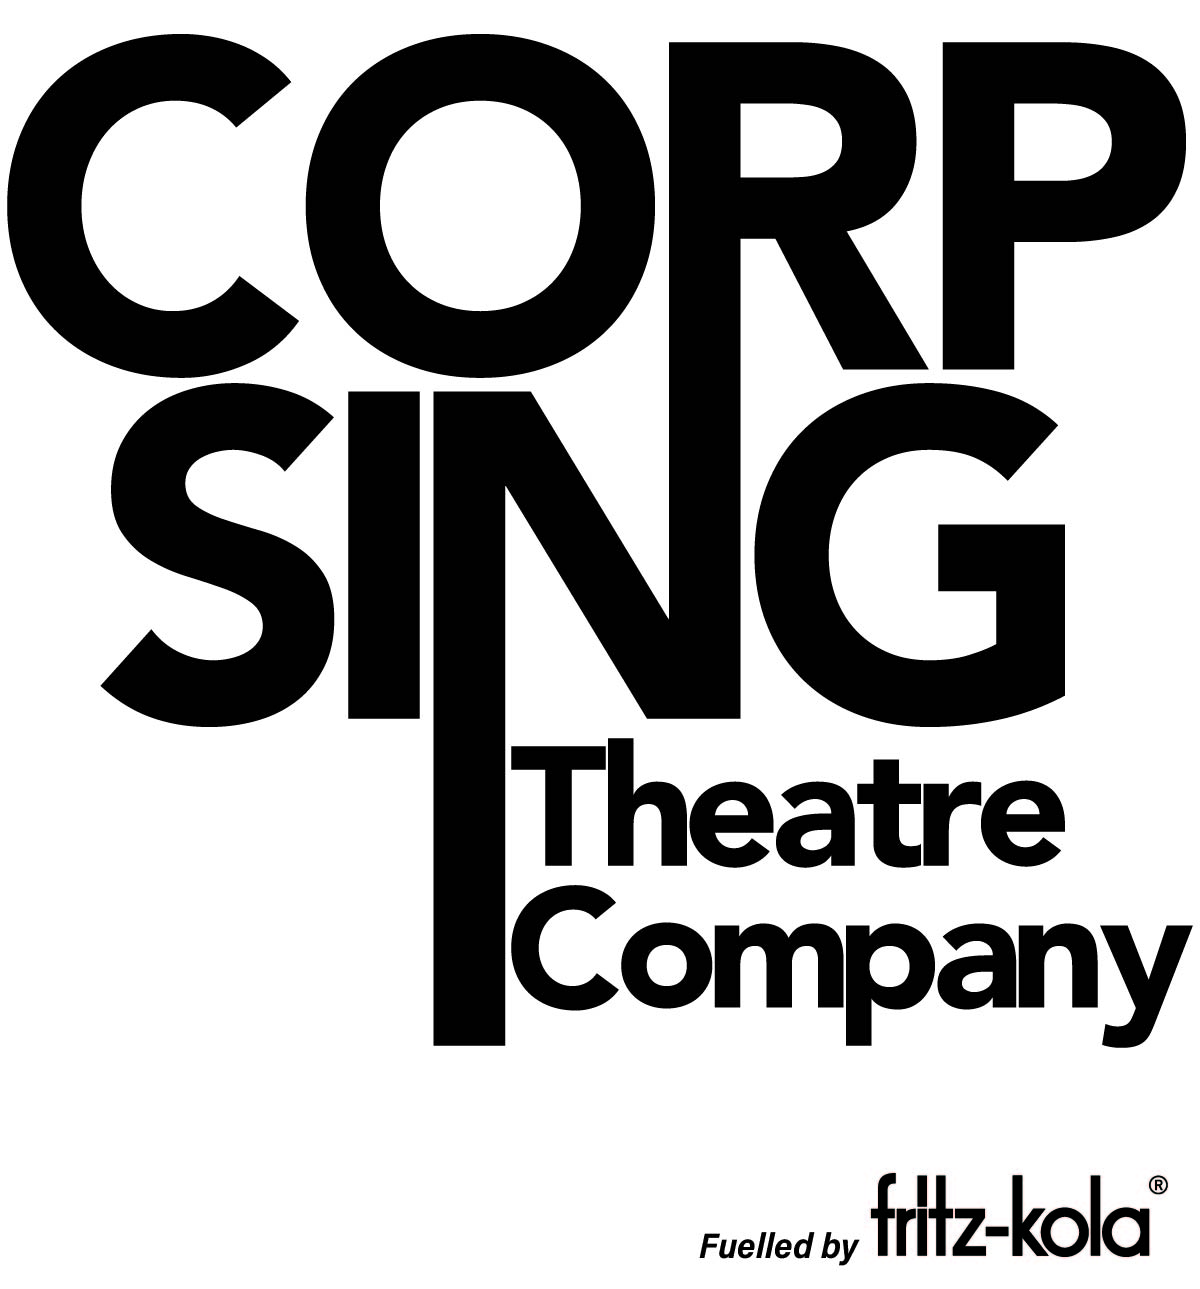 A black and white company logo which reads "CORPSING Theatre Company, Fuelled by Fritz-Kola".